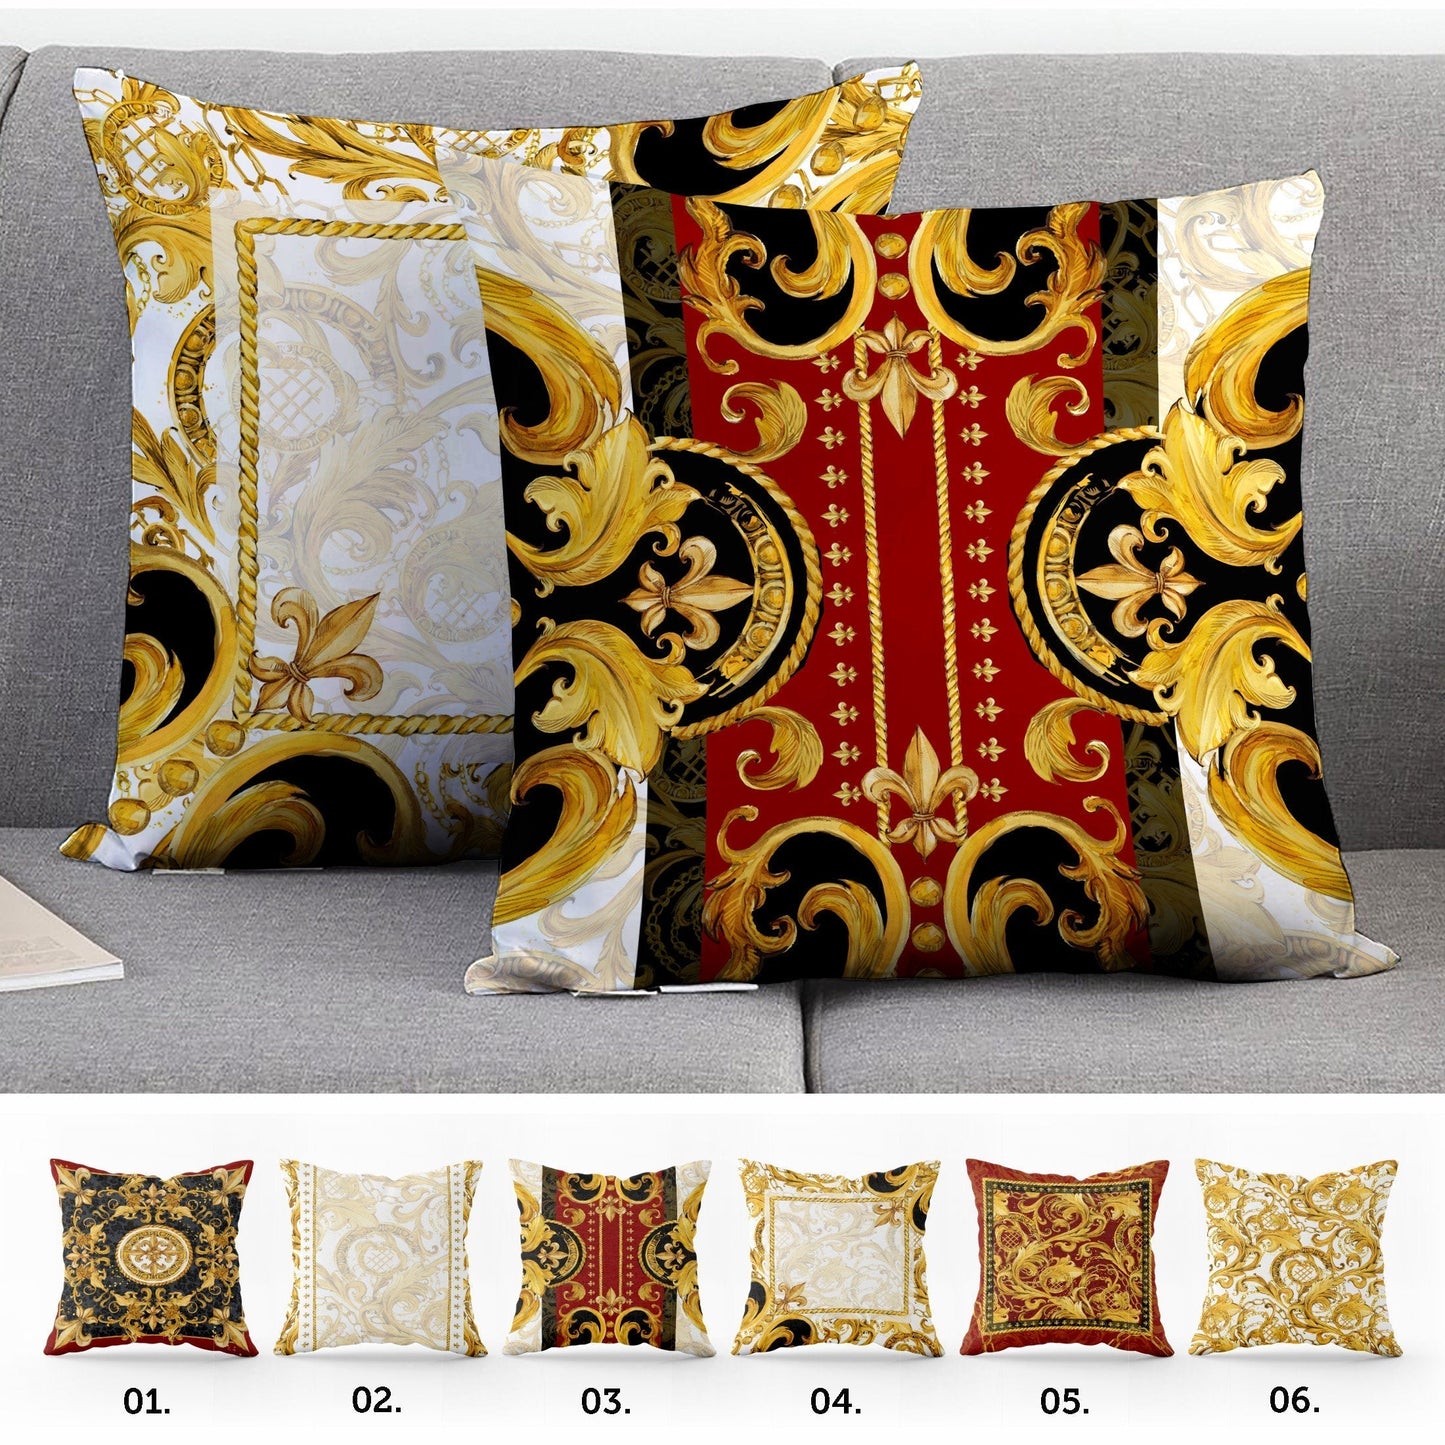 "Sofia" cushion covers set • Art Gift • exclusive baroque retro design pillow covers • different sizes